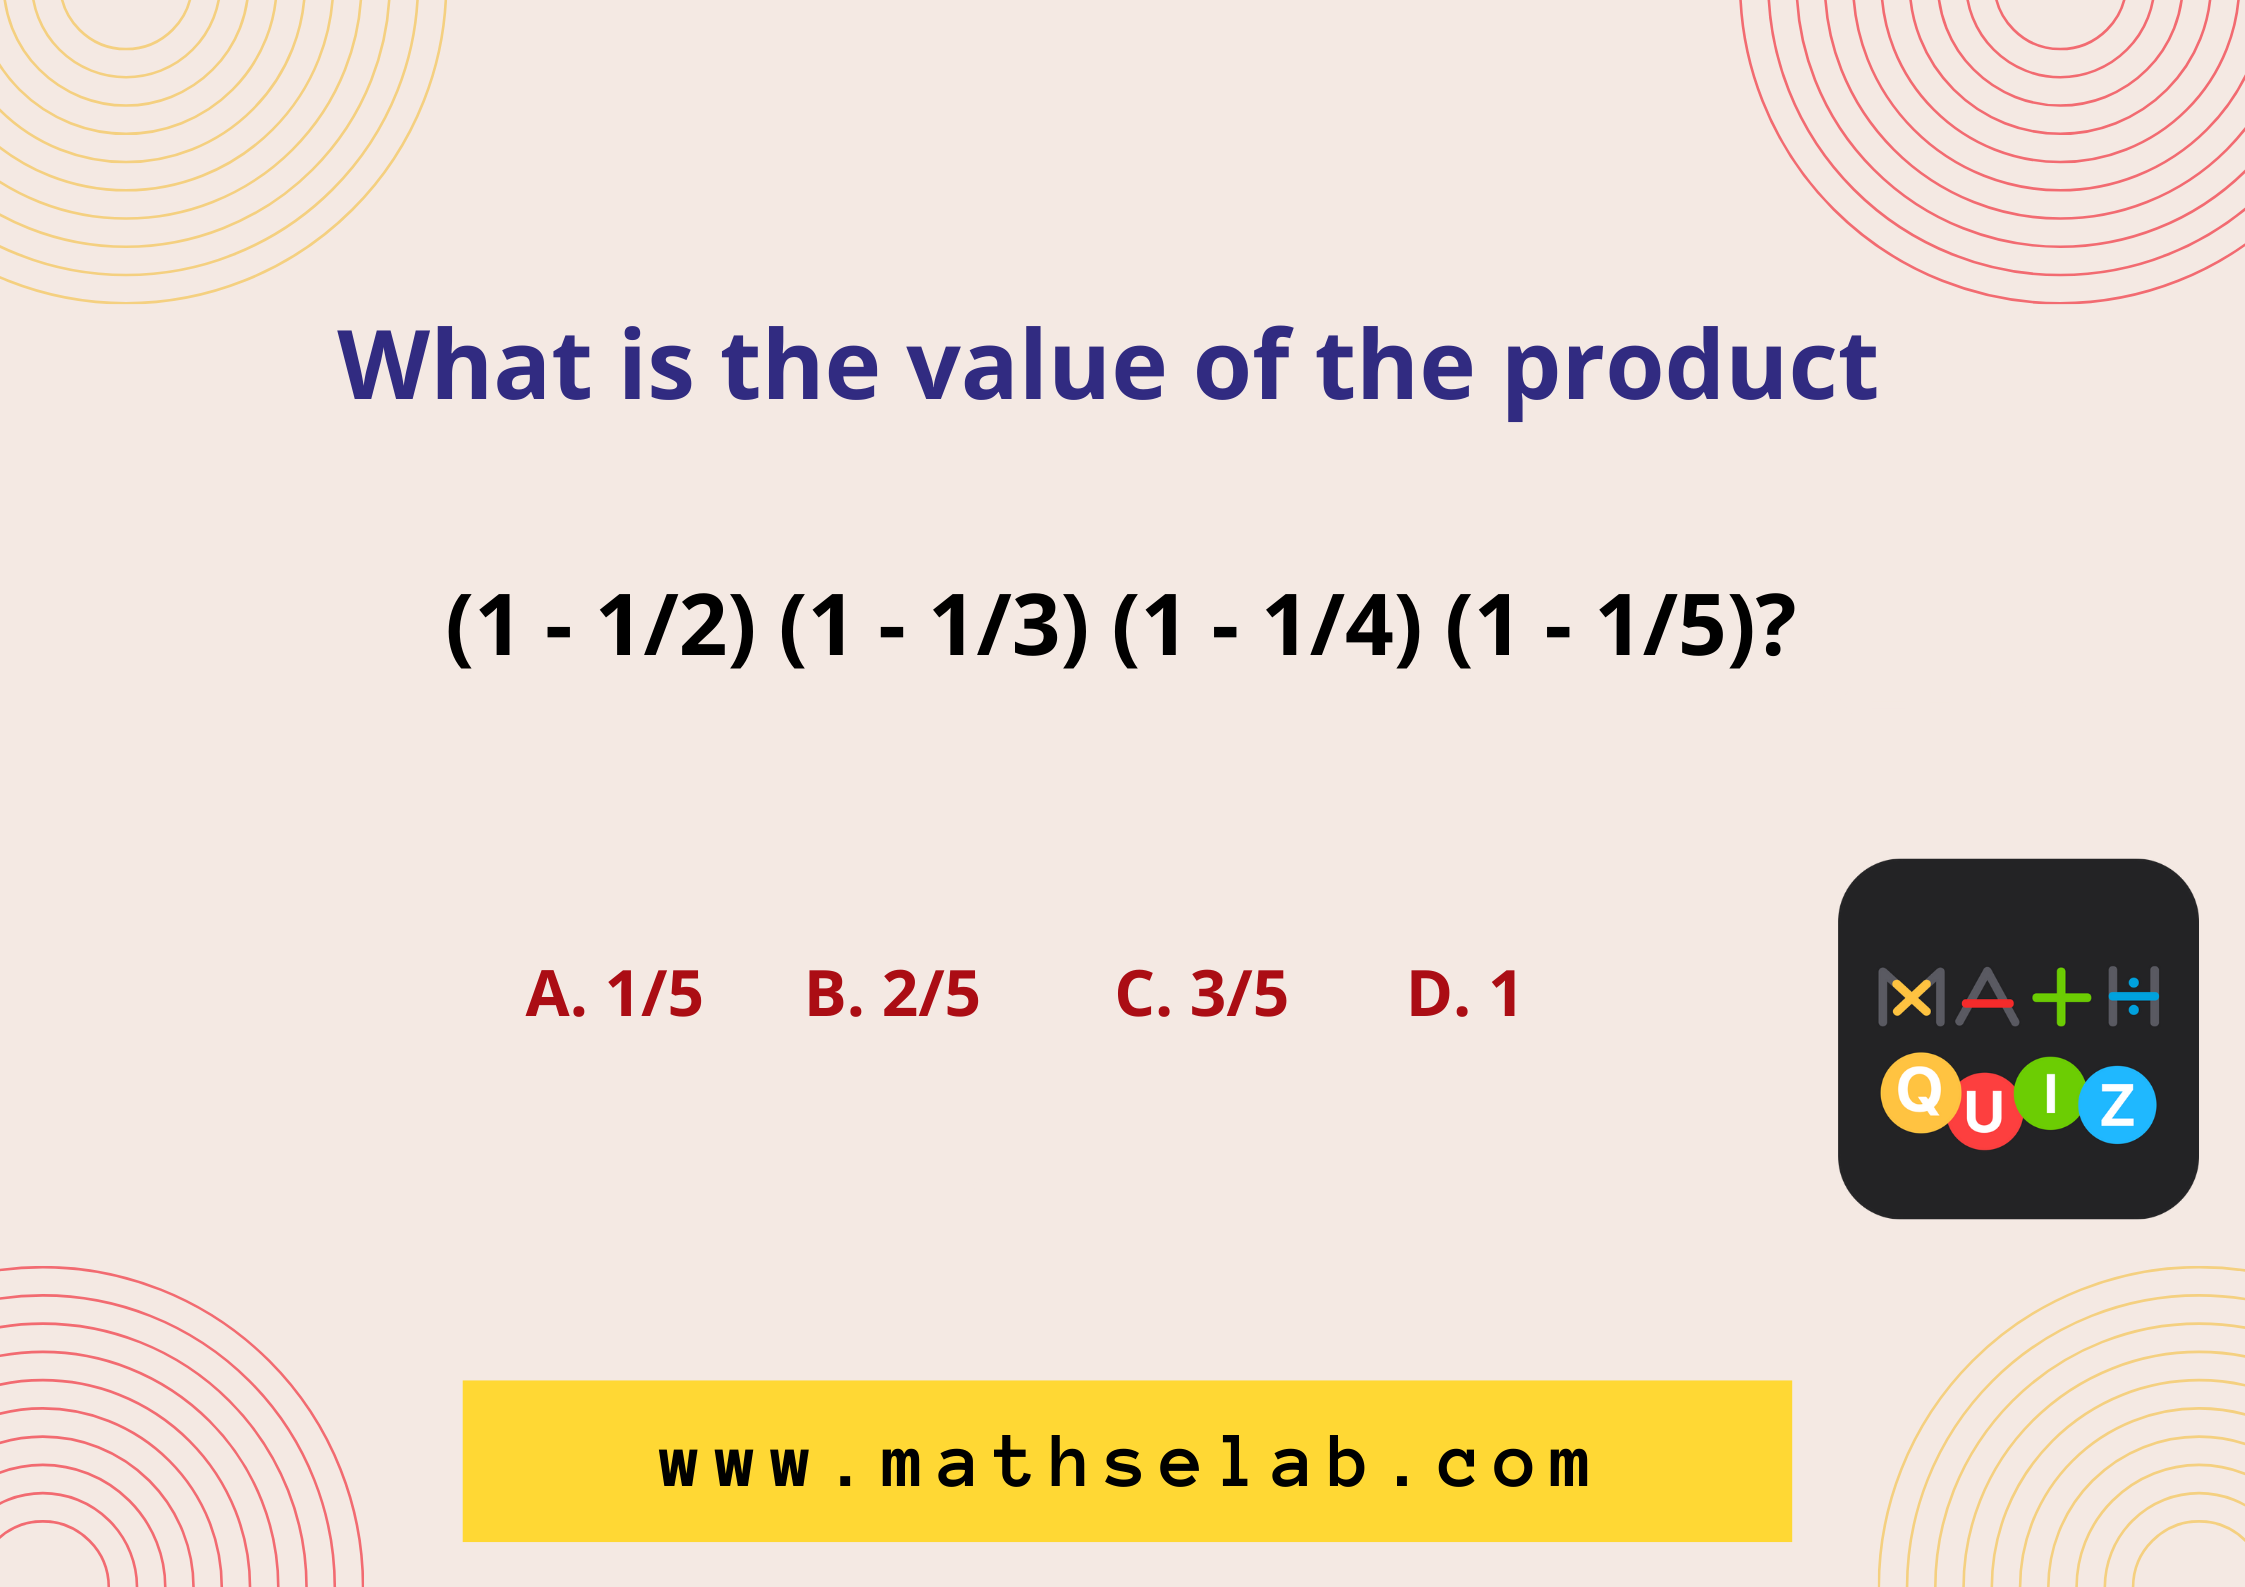 What is the value of the product (1 - 1/2) (1 - 1/3) (1 - 1/4) (1 - 1/5)?